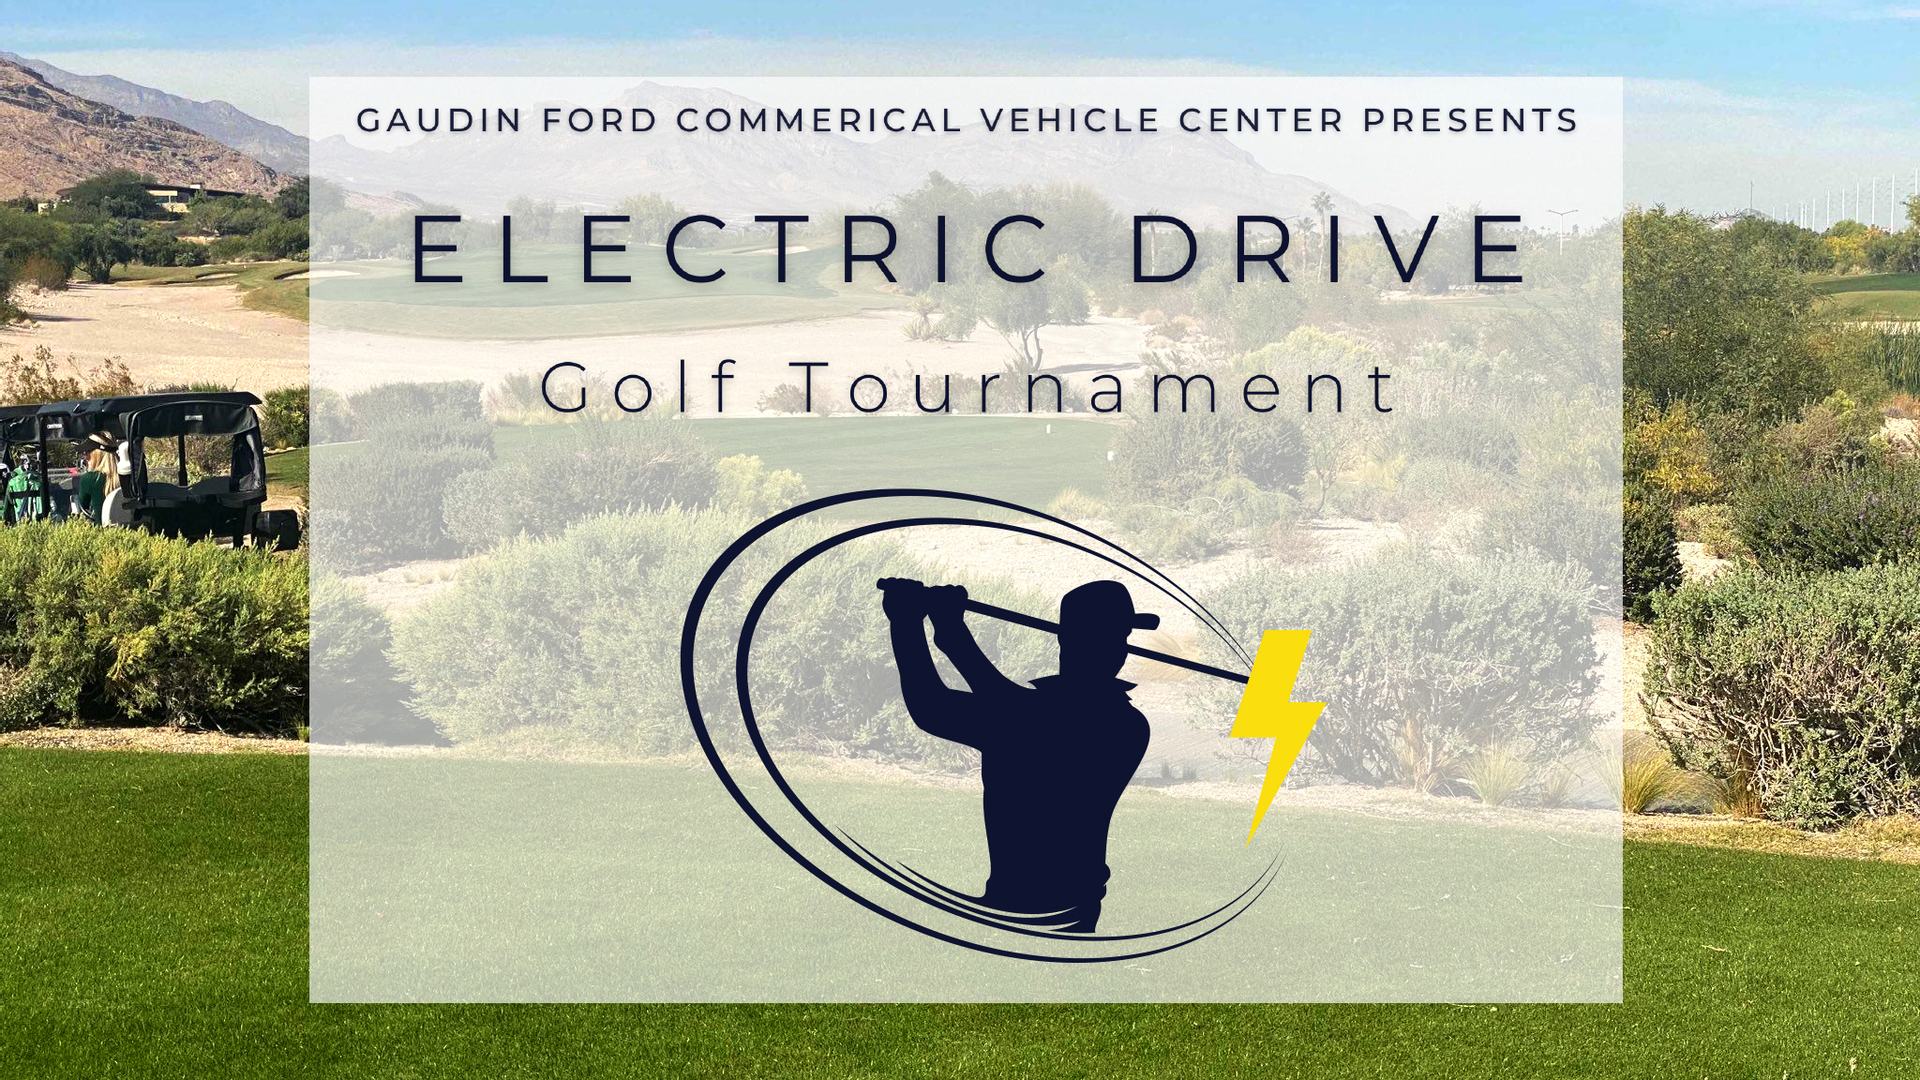 Hytiva® and Shelby® Sponsor The Electric Drive Golf Tournament with Gaudin Ford at Bear's Best